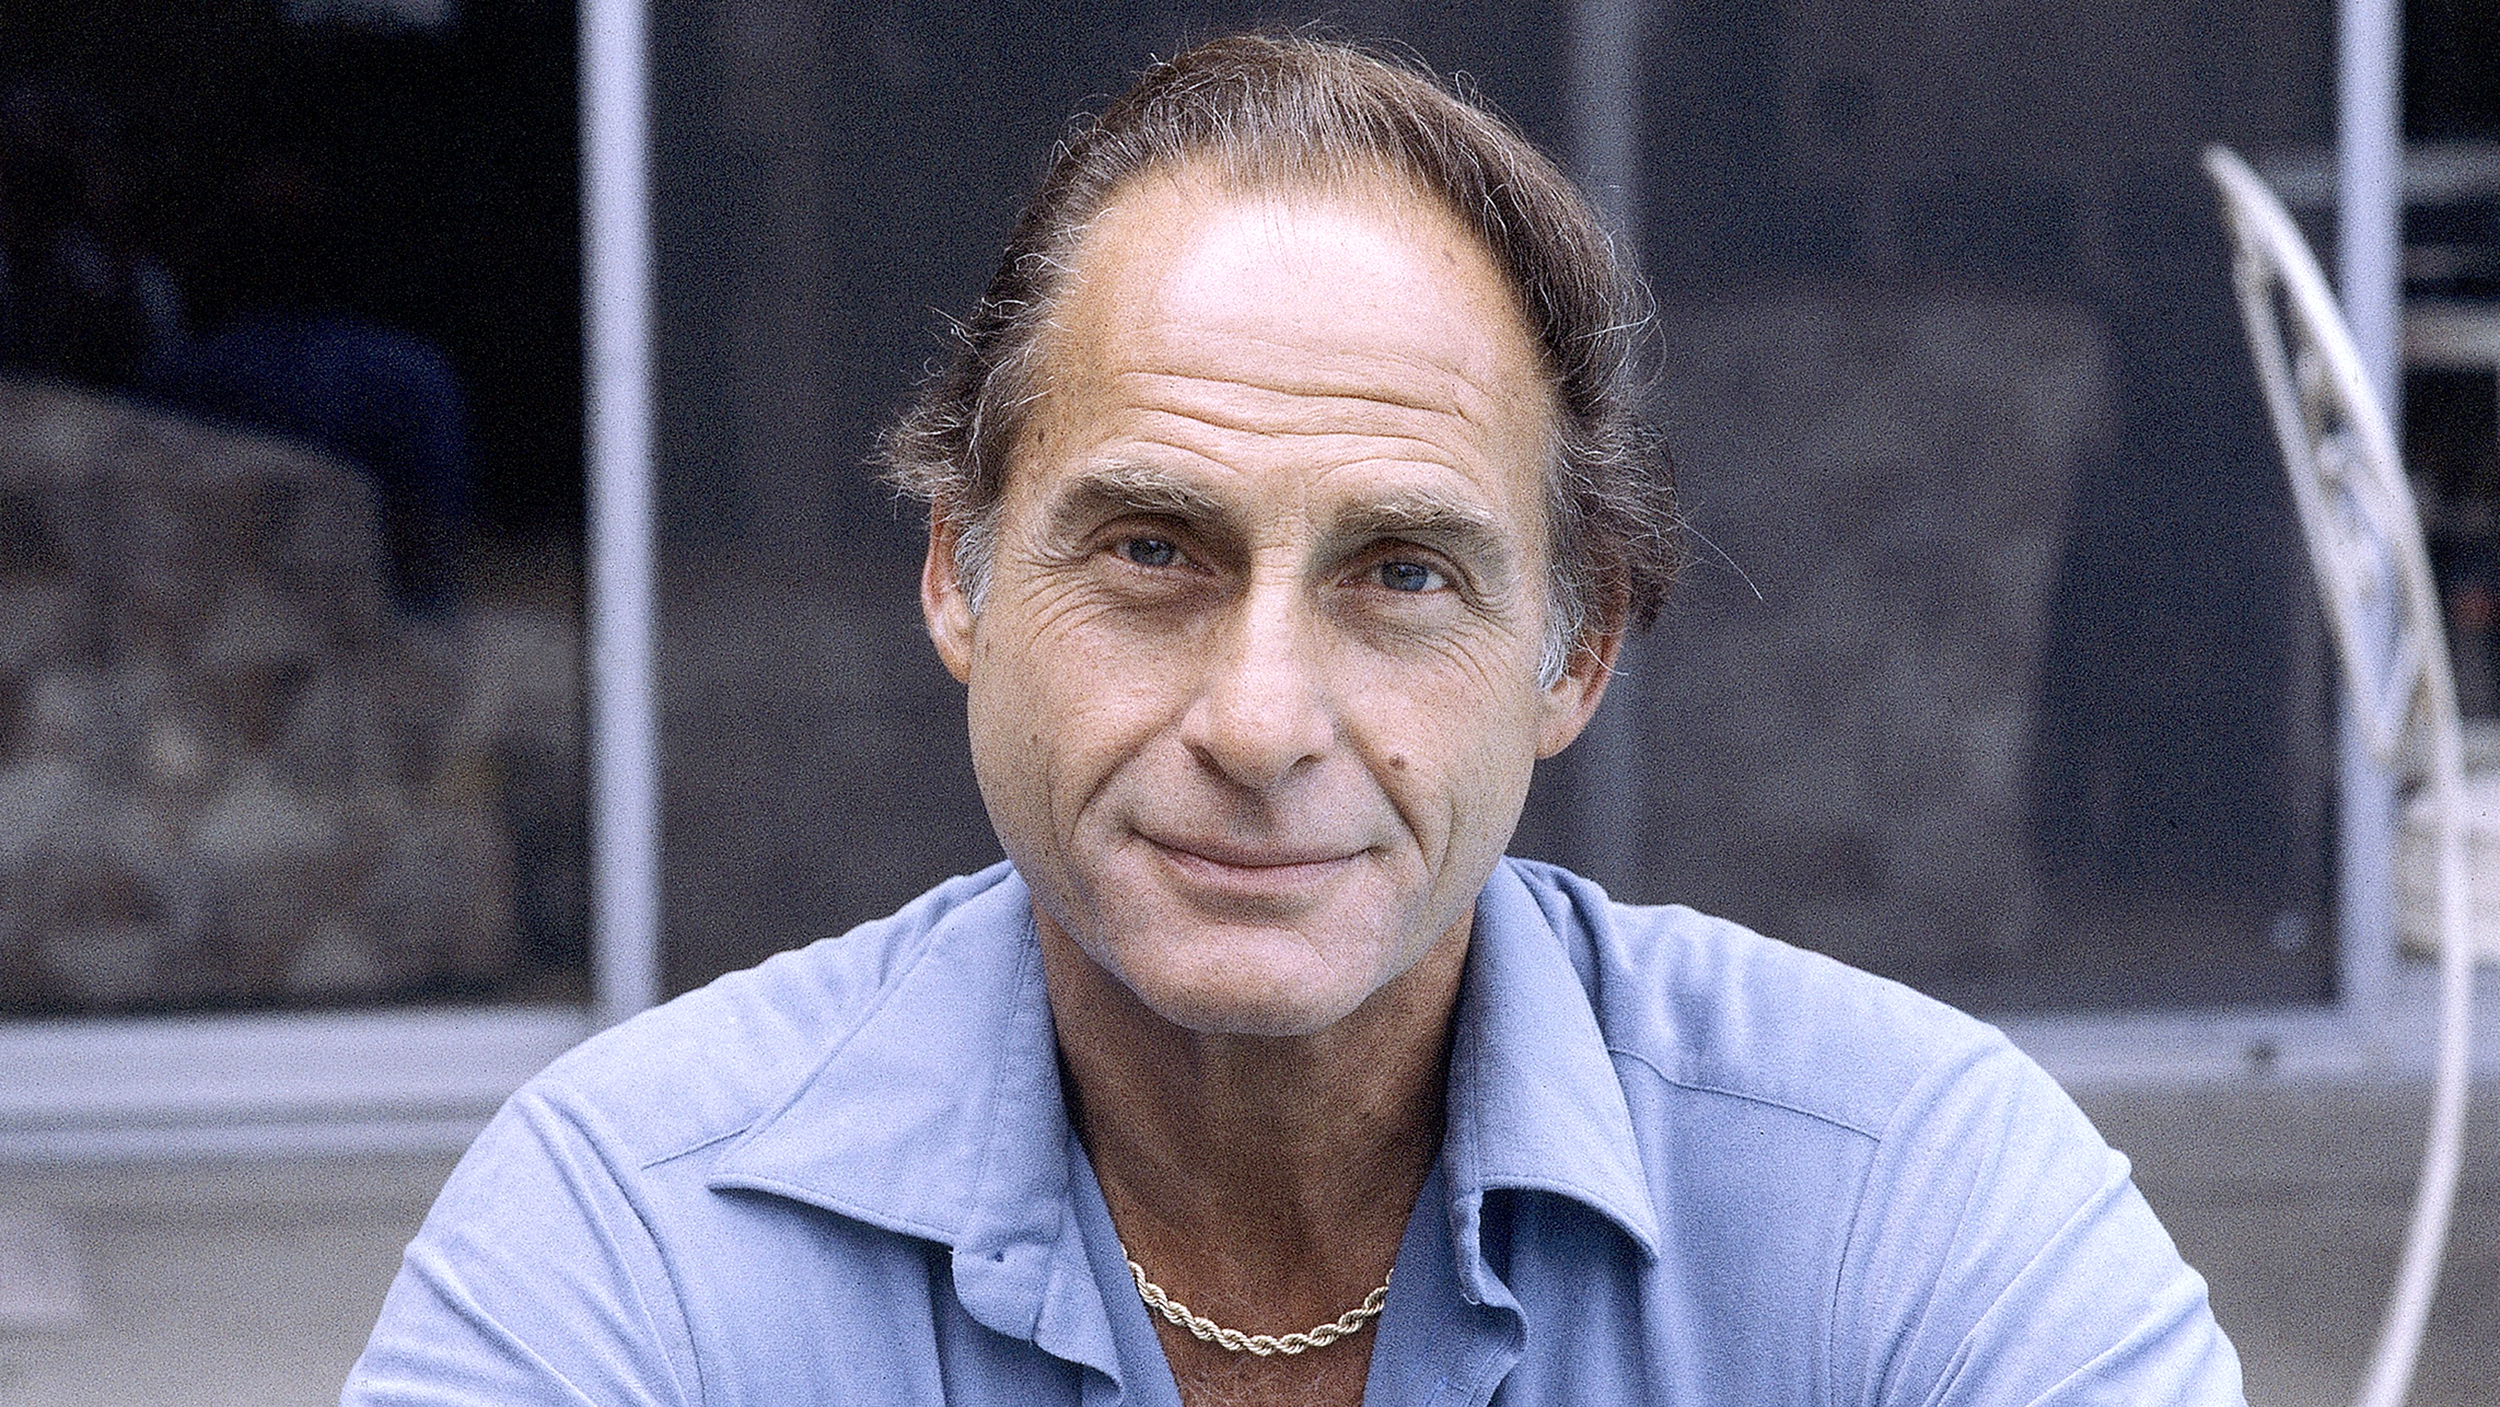 Sid Caesar in the role of Coach Vince Calhoun - She played the character of a tough-talking gym guy who was the coach of all the sports teams. He died in February 2014 due to a short illness.